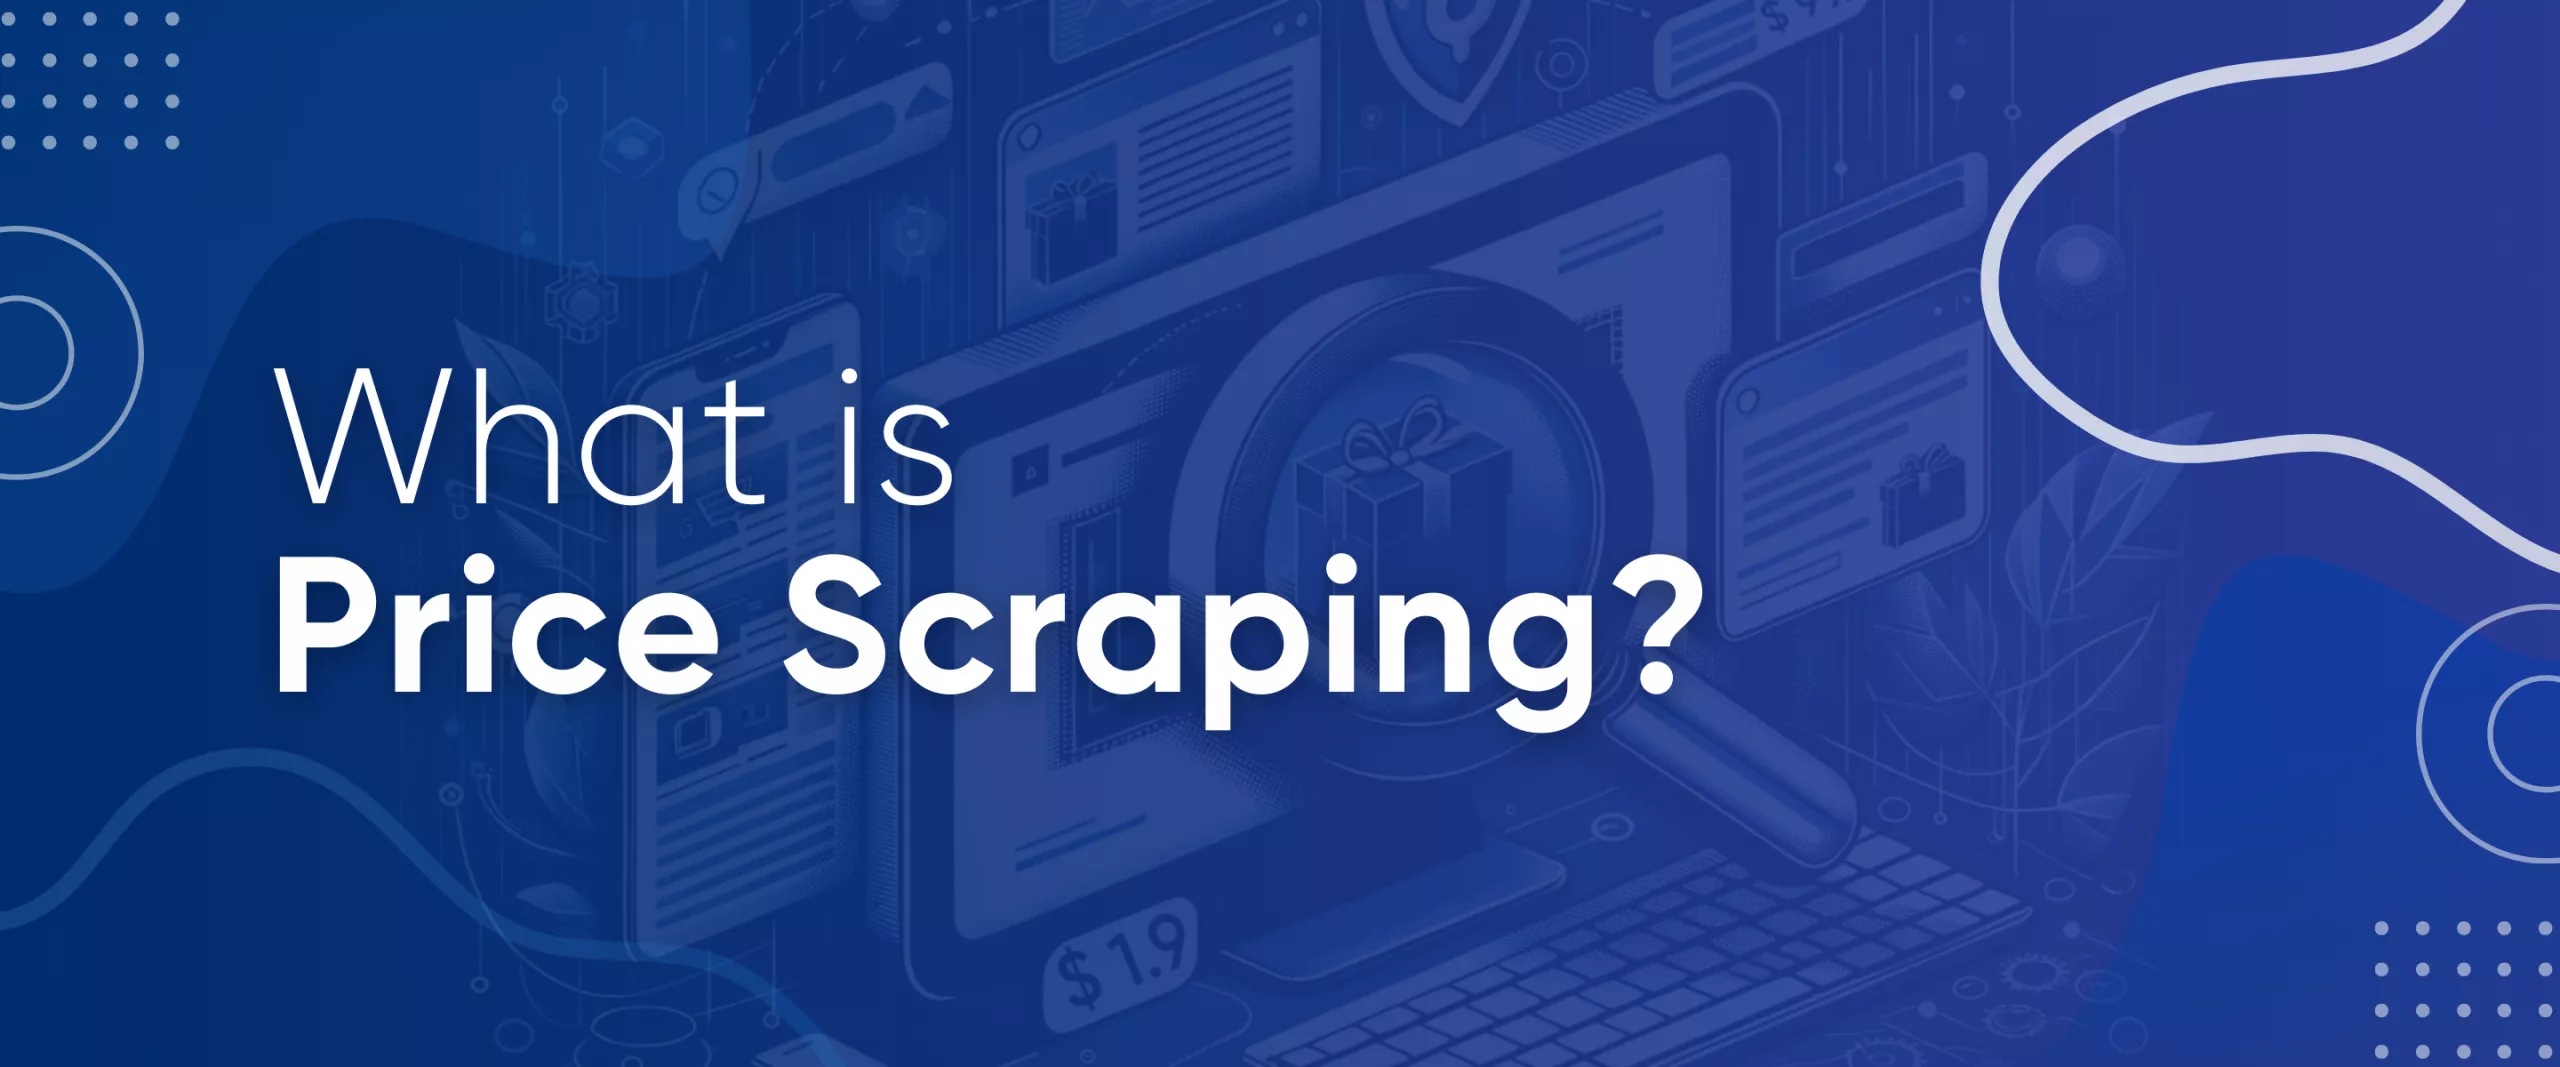 Price Scraping: What It Is and How to Use It for Business Success